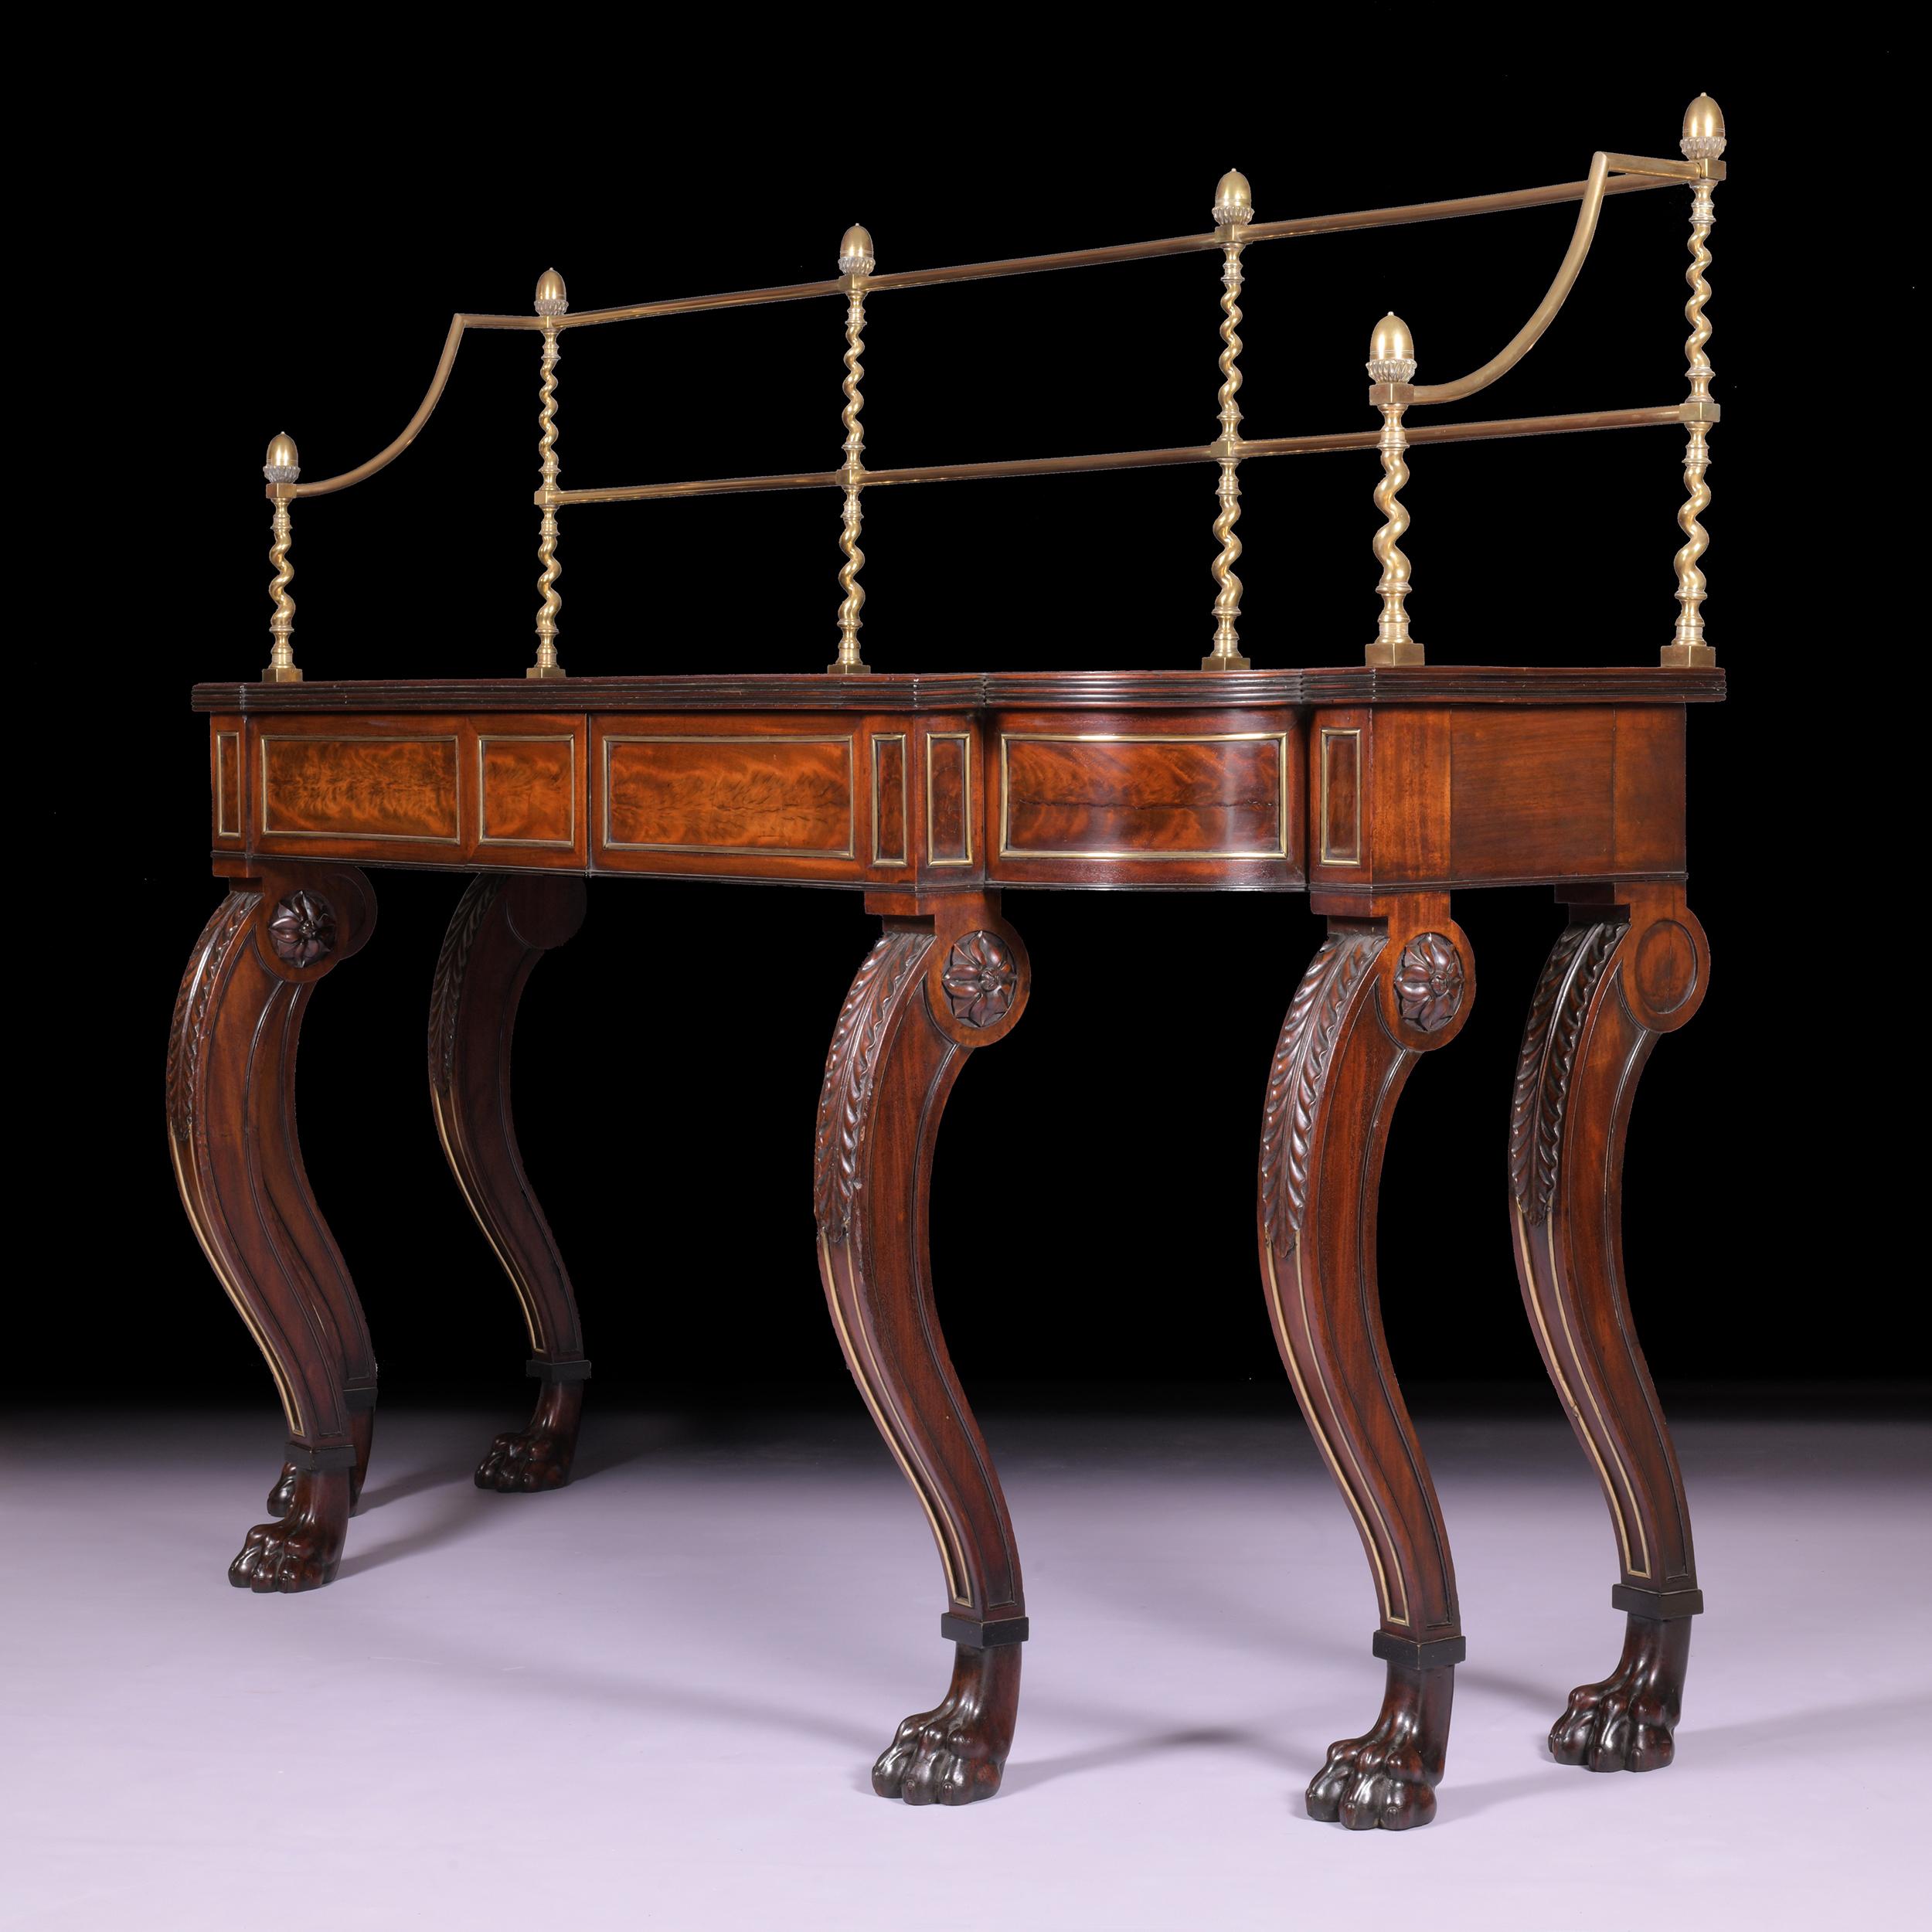 An exceptional and unusual early Regency mahogany and ebony banded serving / console table, with brass gallery back above a rectangular top with breakfront reeded edge and bowed ends, resting on a frieze with two disguised central drawers with